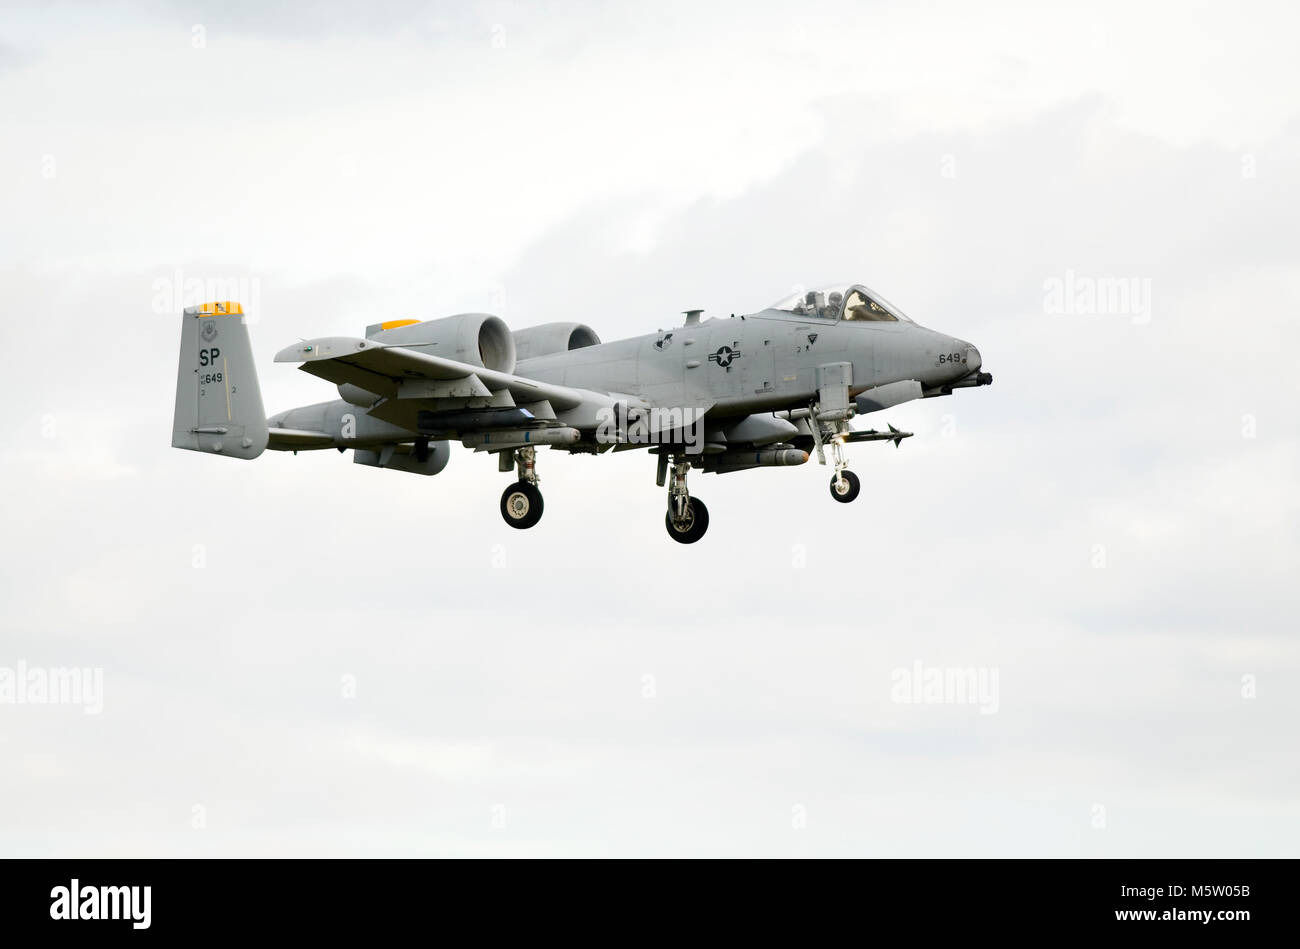 Fairchild Republic A-10C Warthog, 82-0649, of the 81st FS, 52nd FW, USAFE, based at Spangdahlem AB, Germany, seen on final approach to RAF Lakenheath Stock Photo